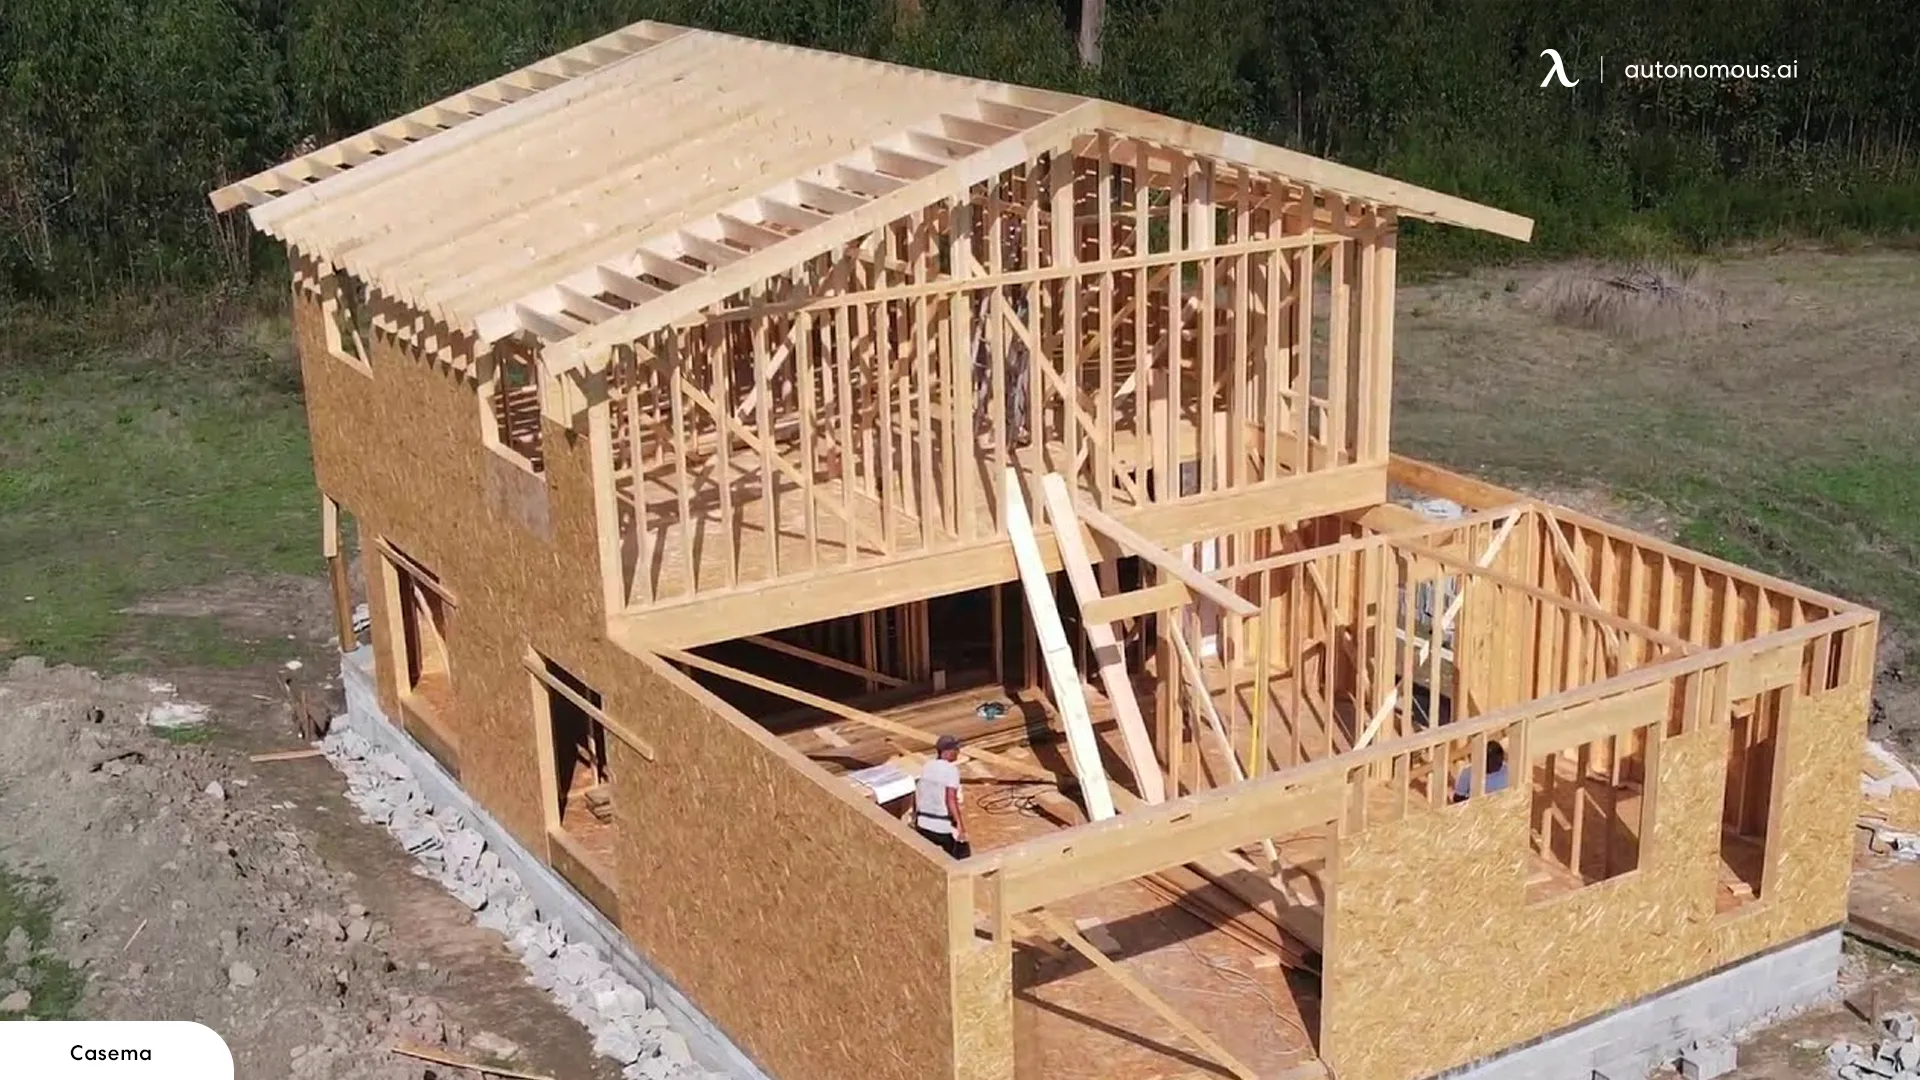 What Are the Benefits of Wood Frame Home Construction?